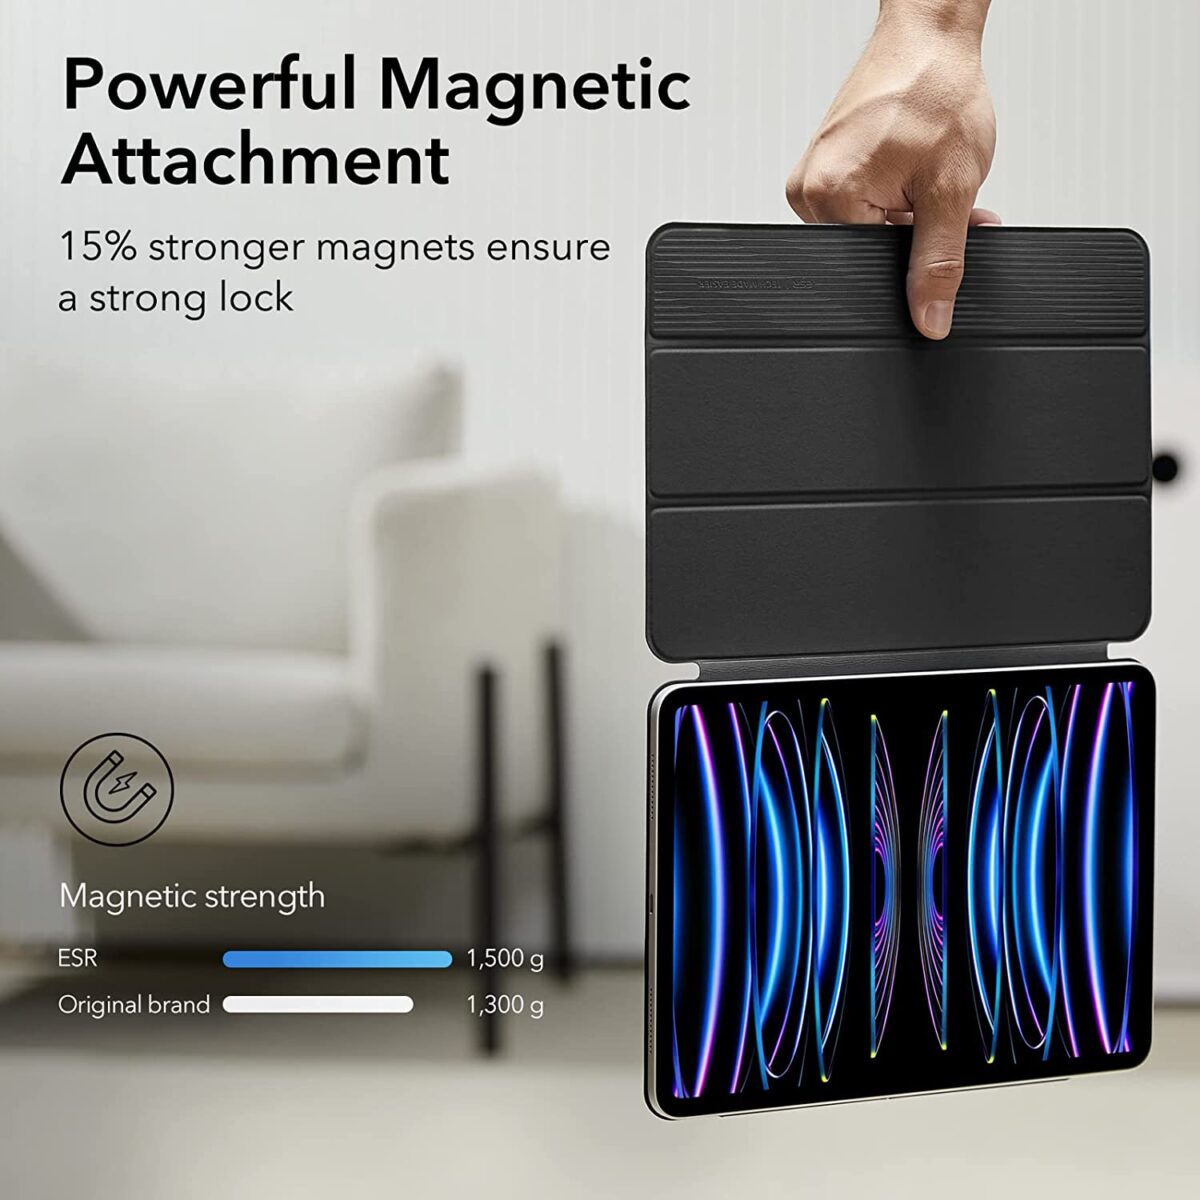 ESR Rebound Magnetic Case with Powerful Magnetic Attachment